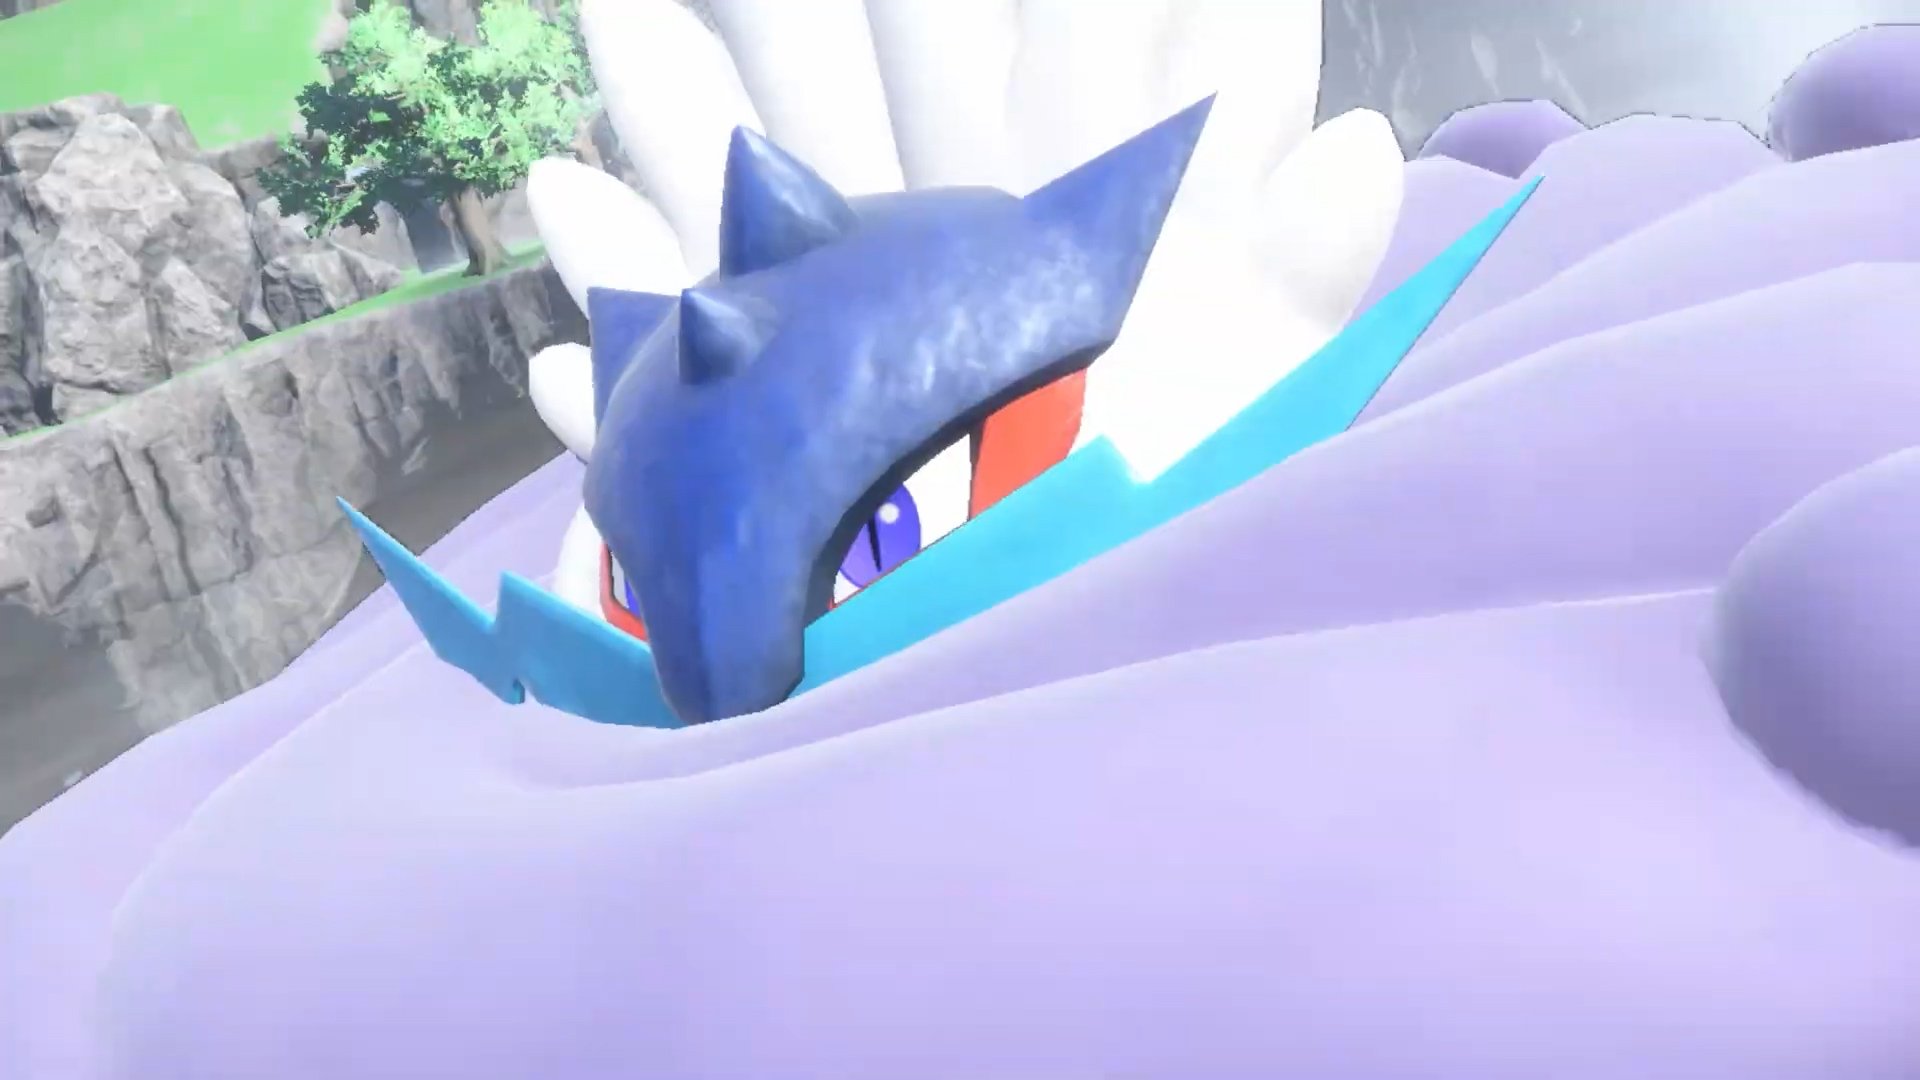 Pokemon Sword and Shield Exclusives Guide - Which Version Has Better Pokemon